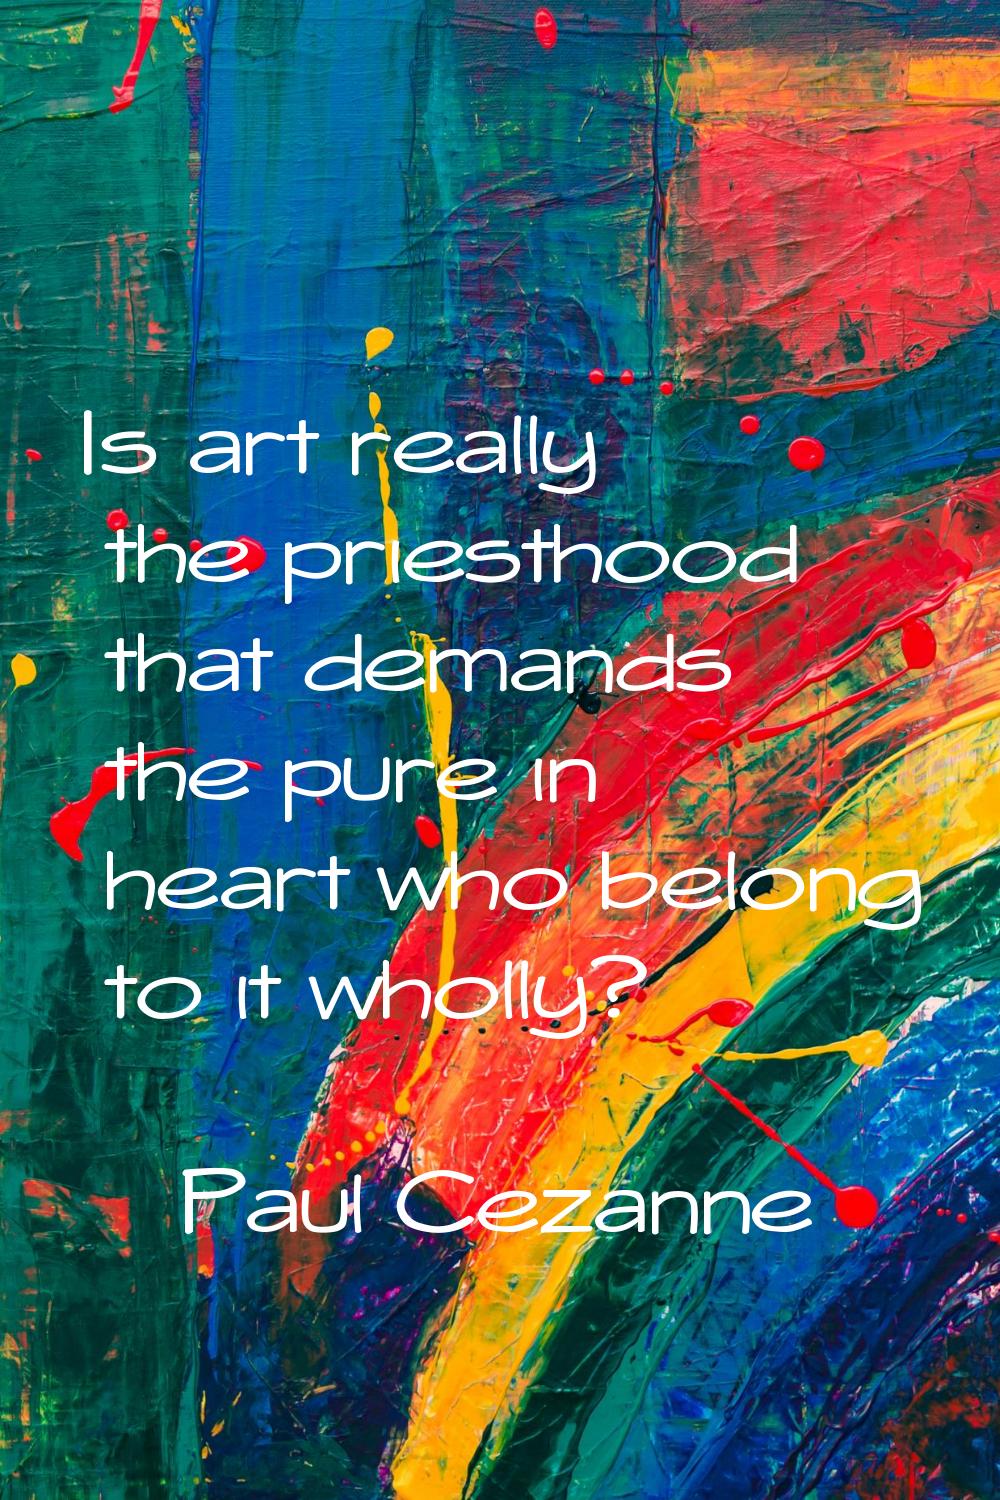 Is art really the priesthood that demands the pure in heart who belong to it wholly?